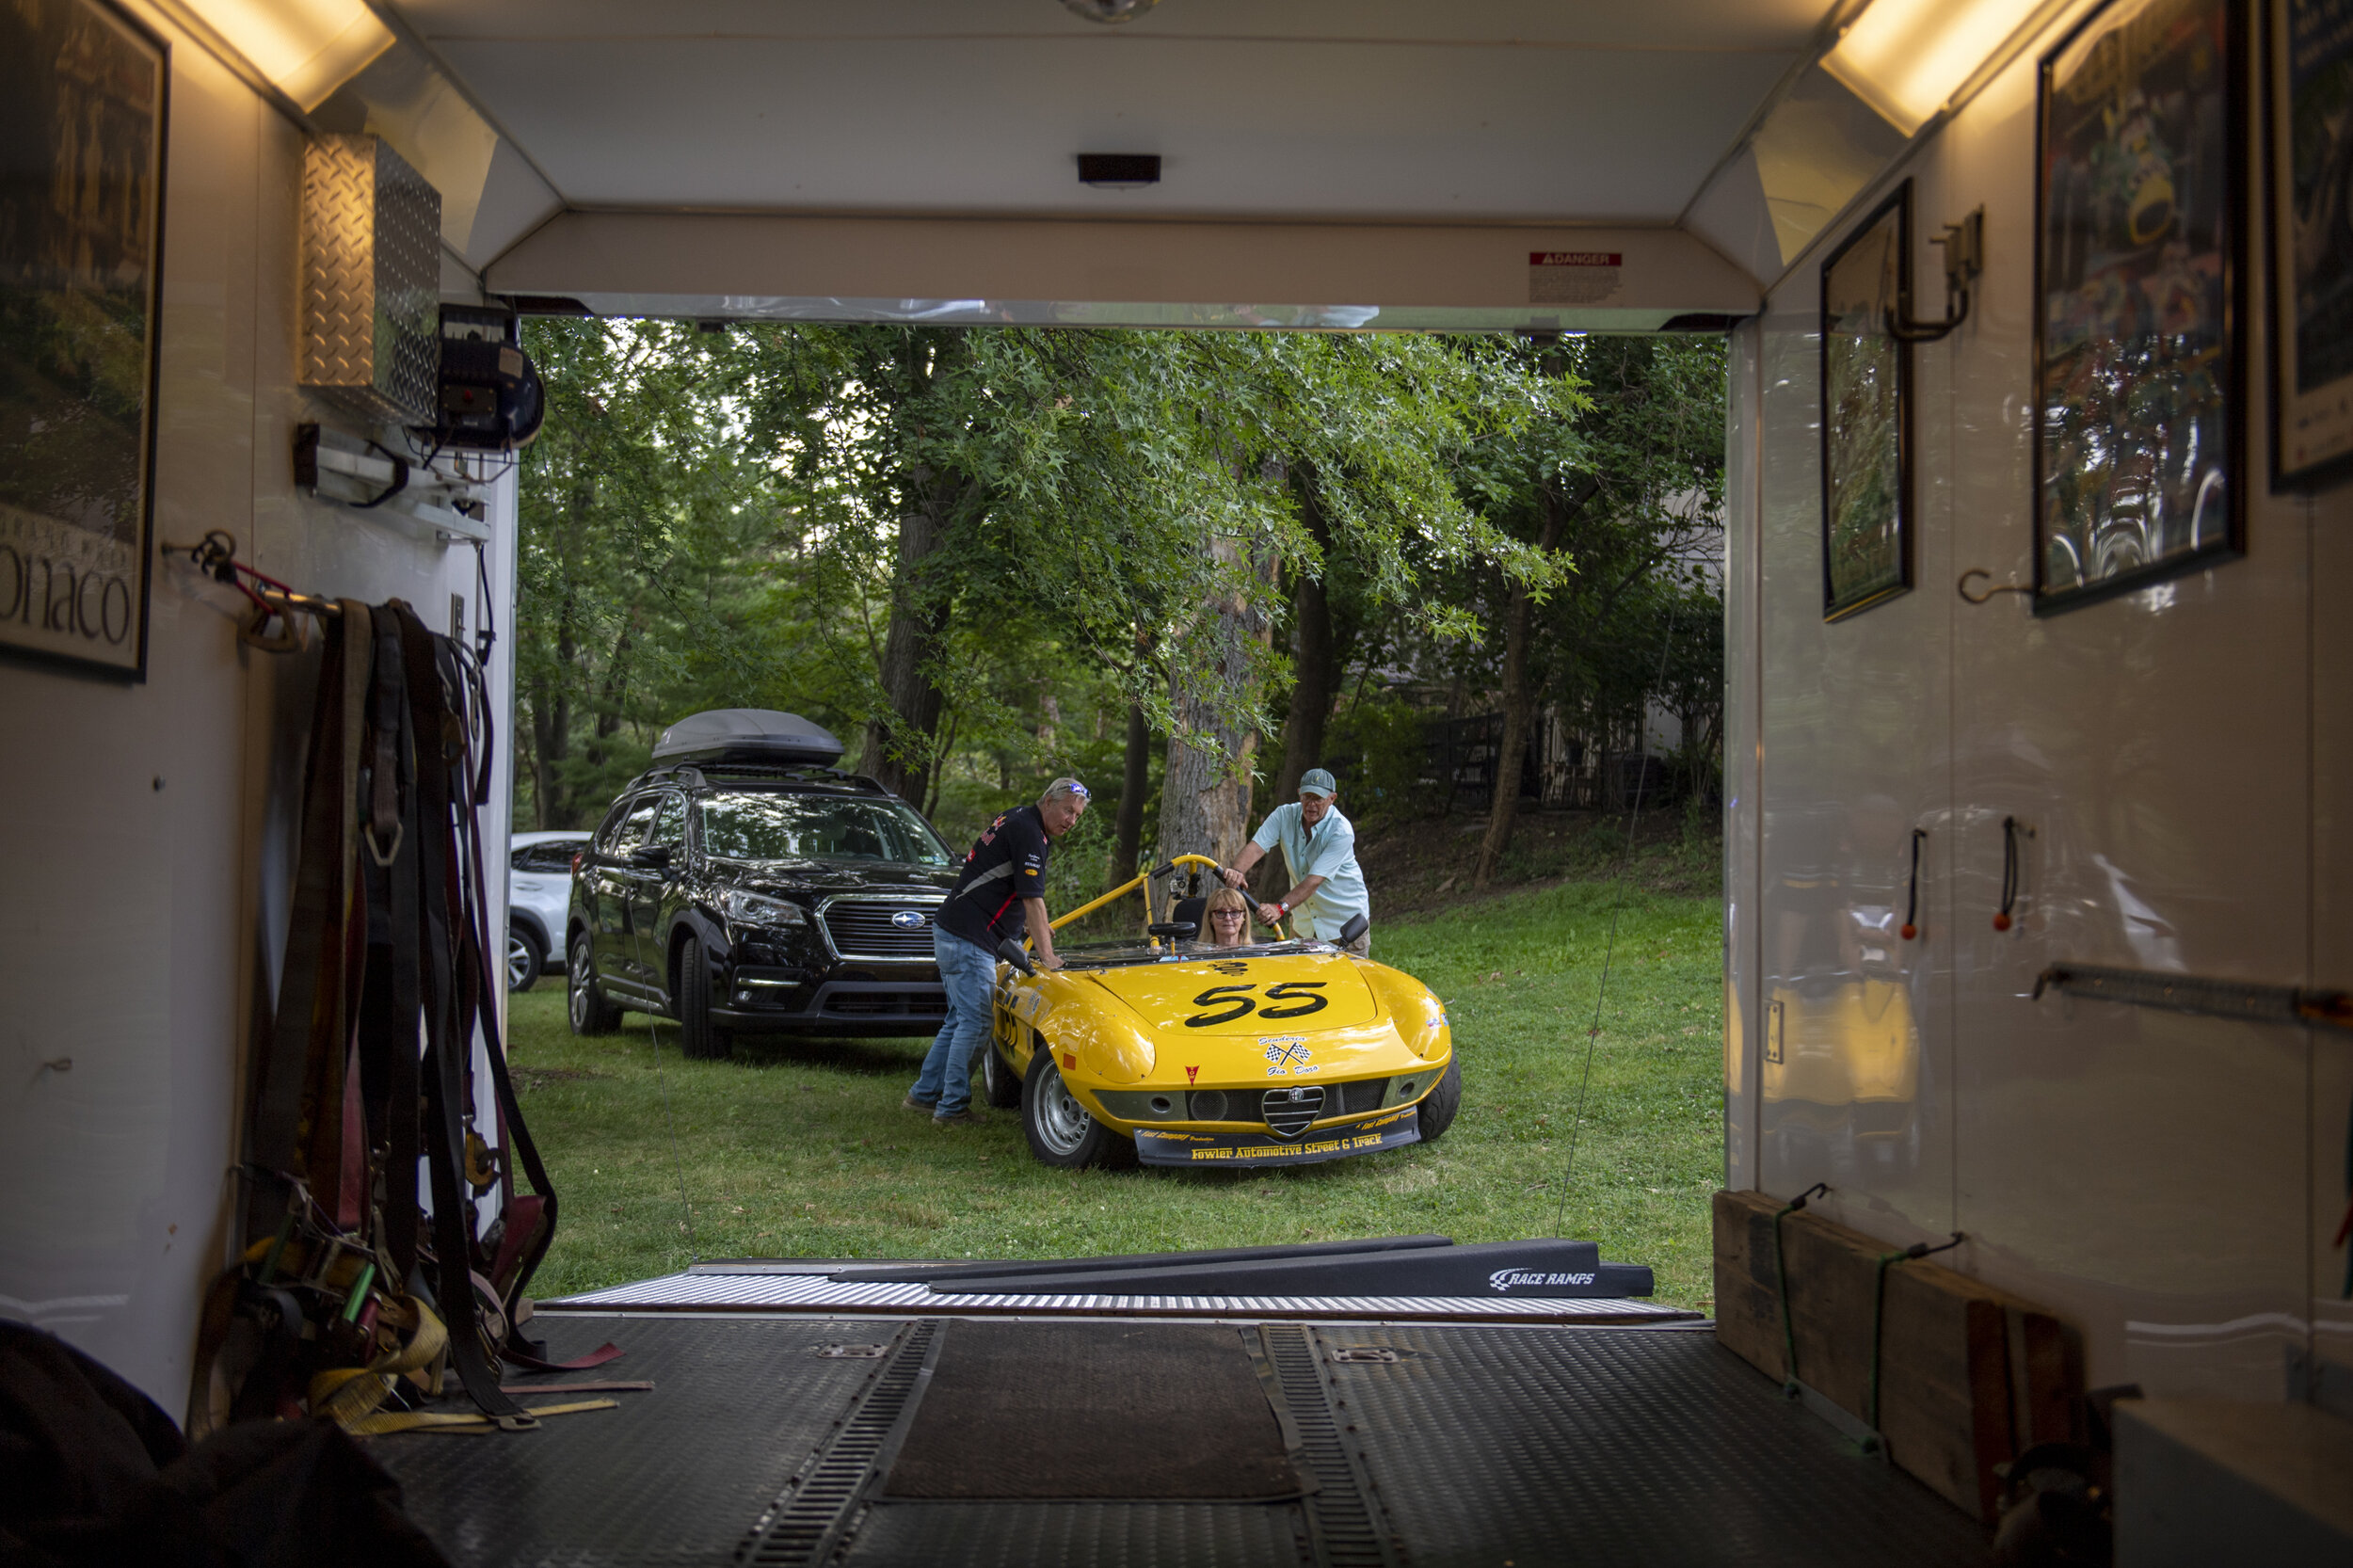  (Left-Right) Joe Mendel and John Bechtol push Dotti Bechtol and her Alfa Romeo 72’ Spider back into their trailer while taking down their Pitt on July 29, 2021, in Pittsburgh, Pa.  